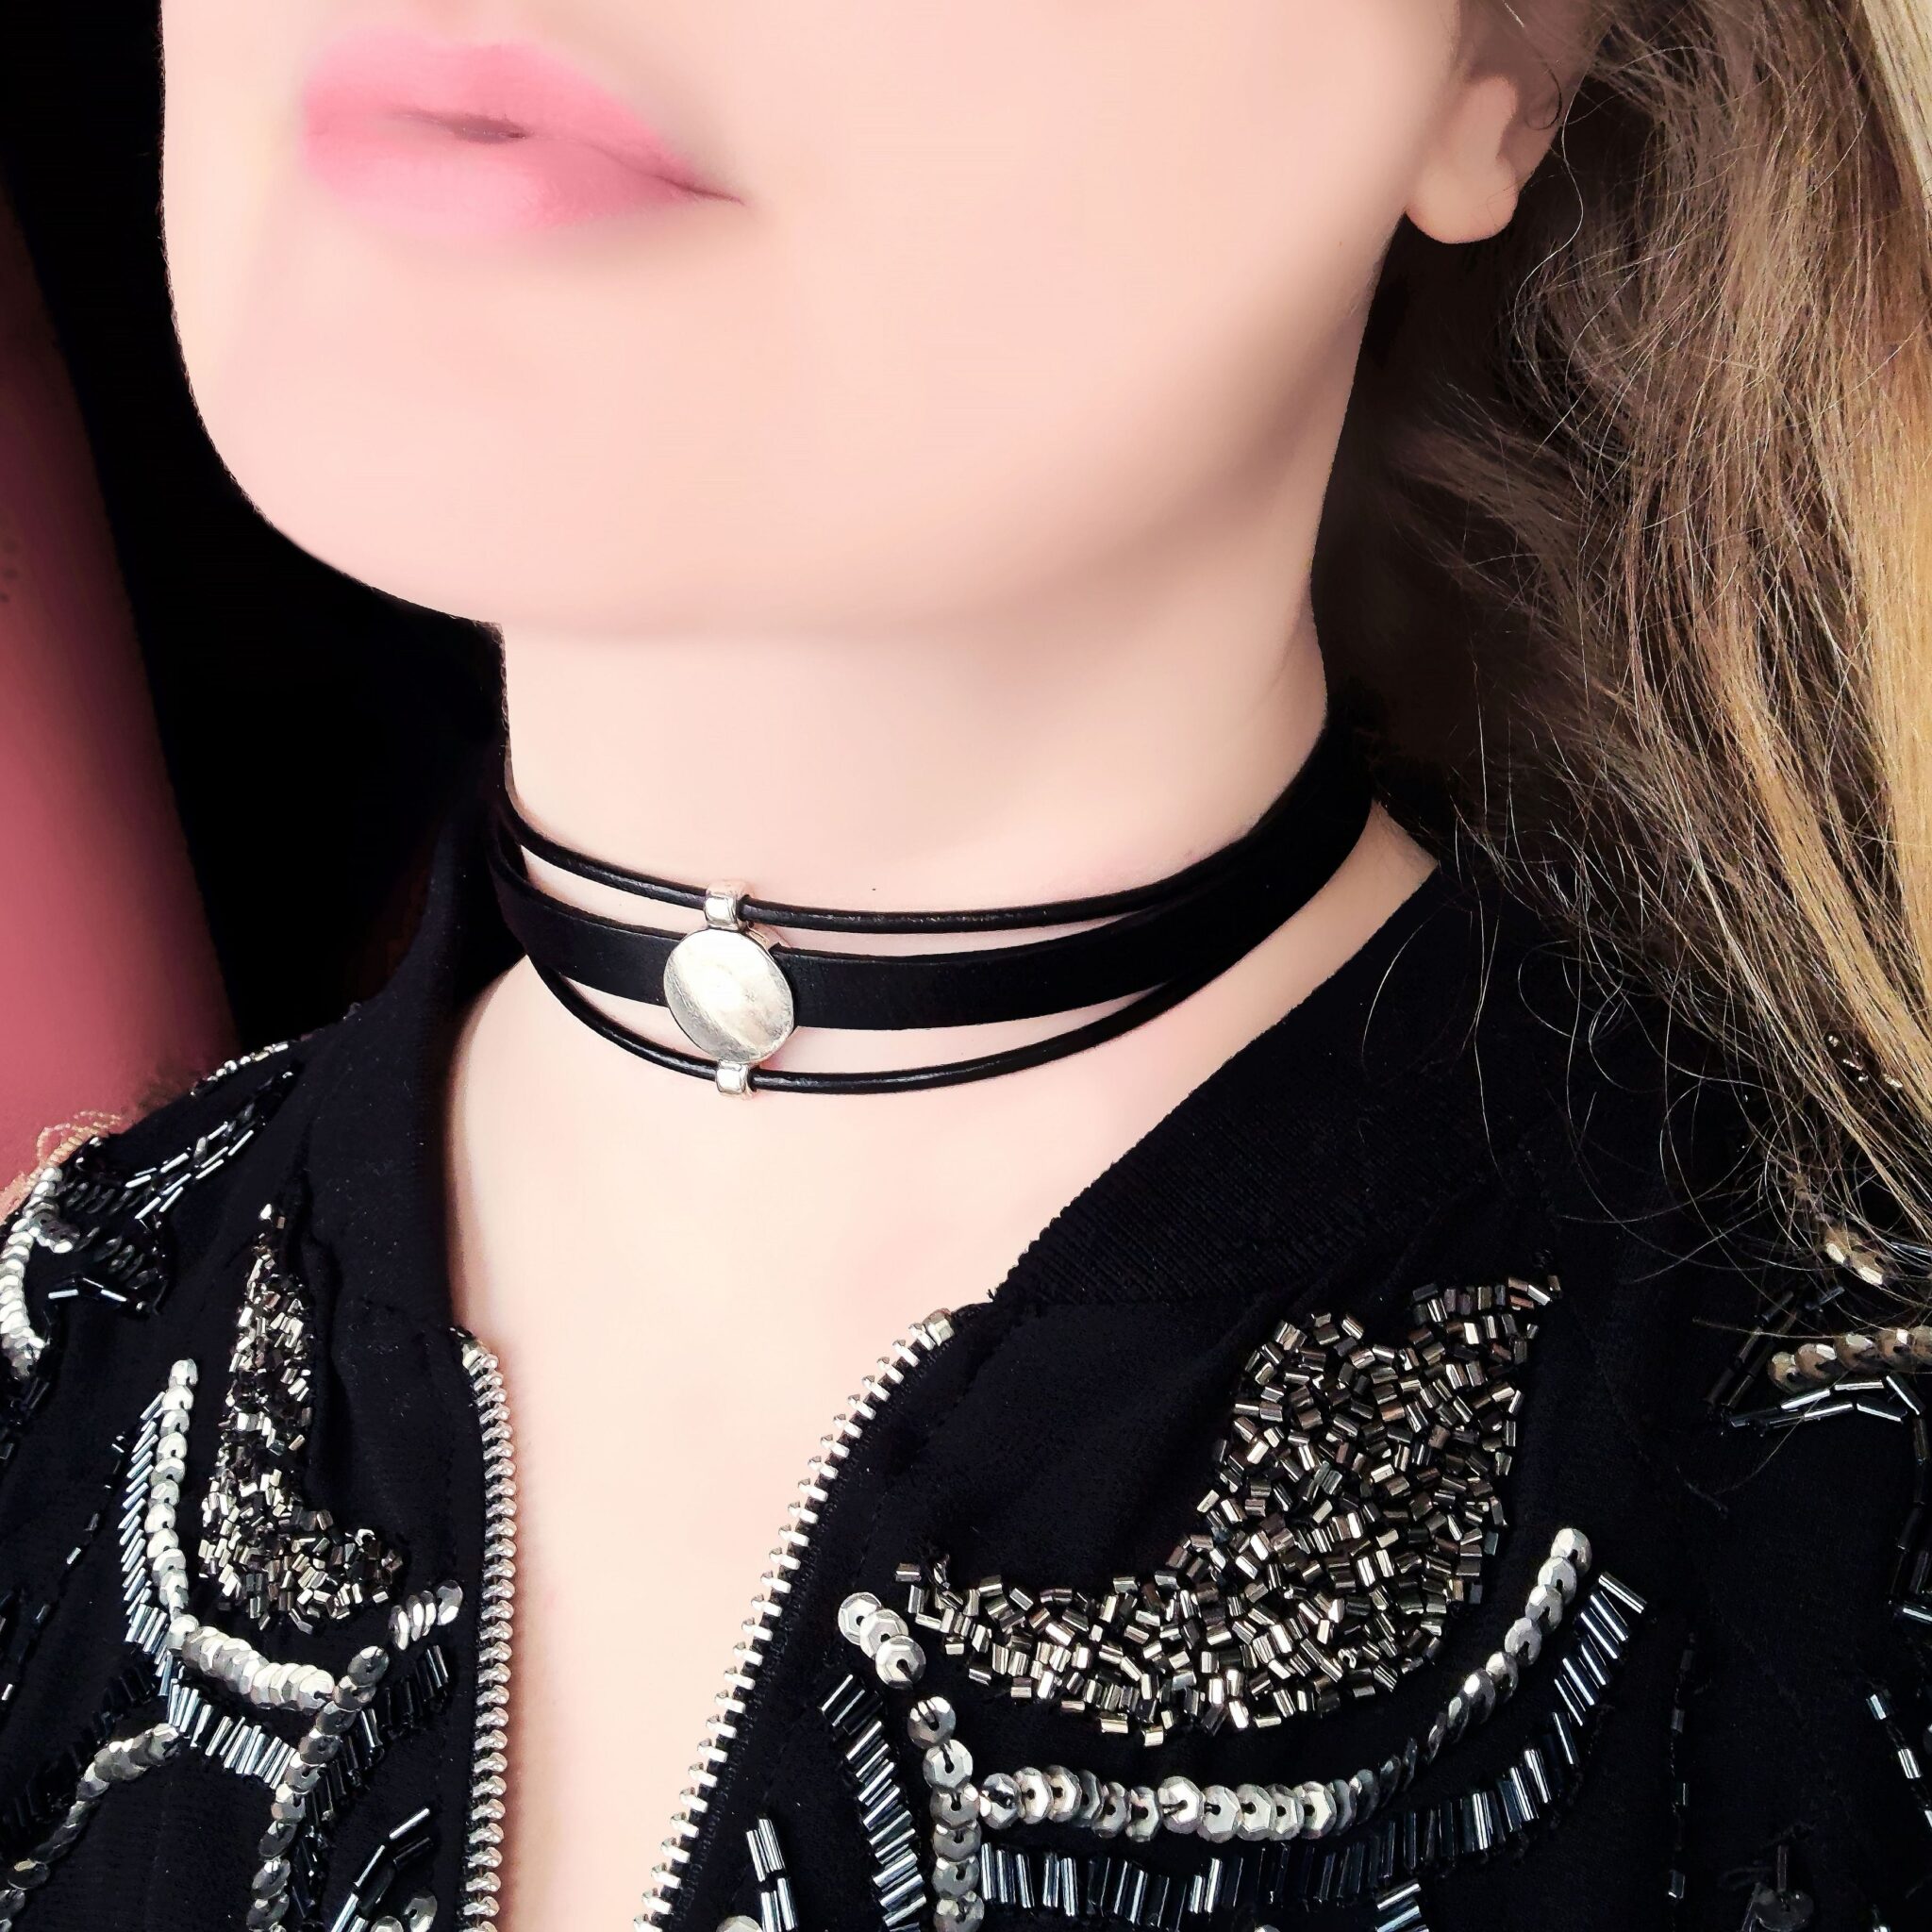 Steampunk BDSM jewelry submissive day collar leather choker dominant ...